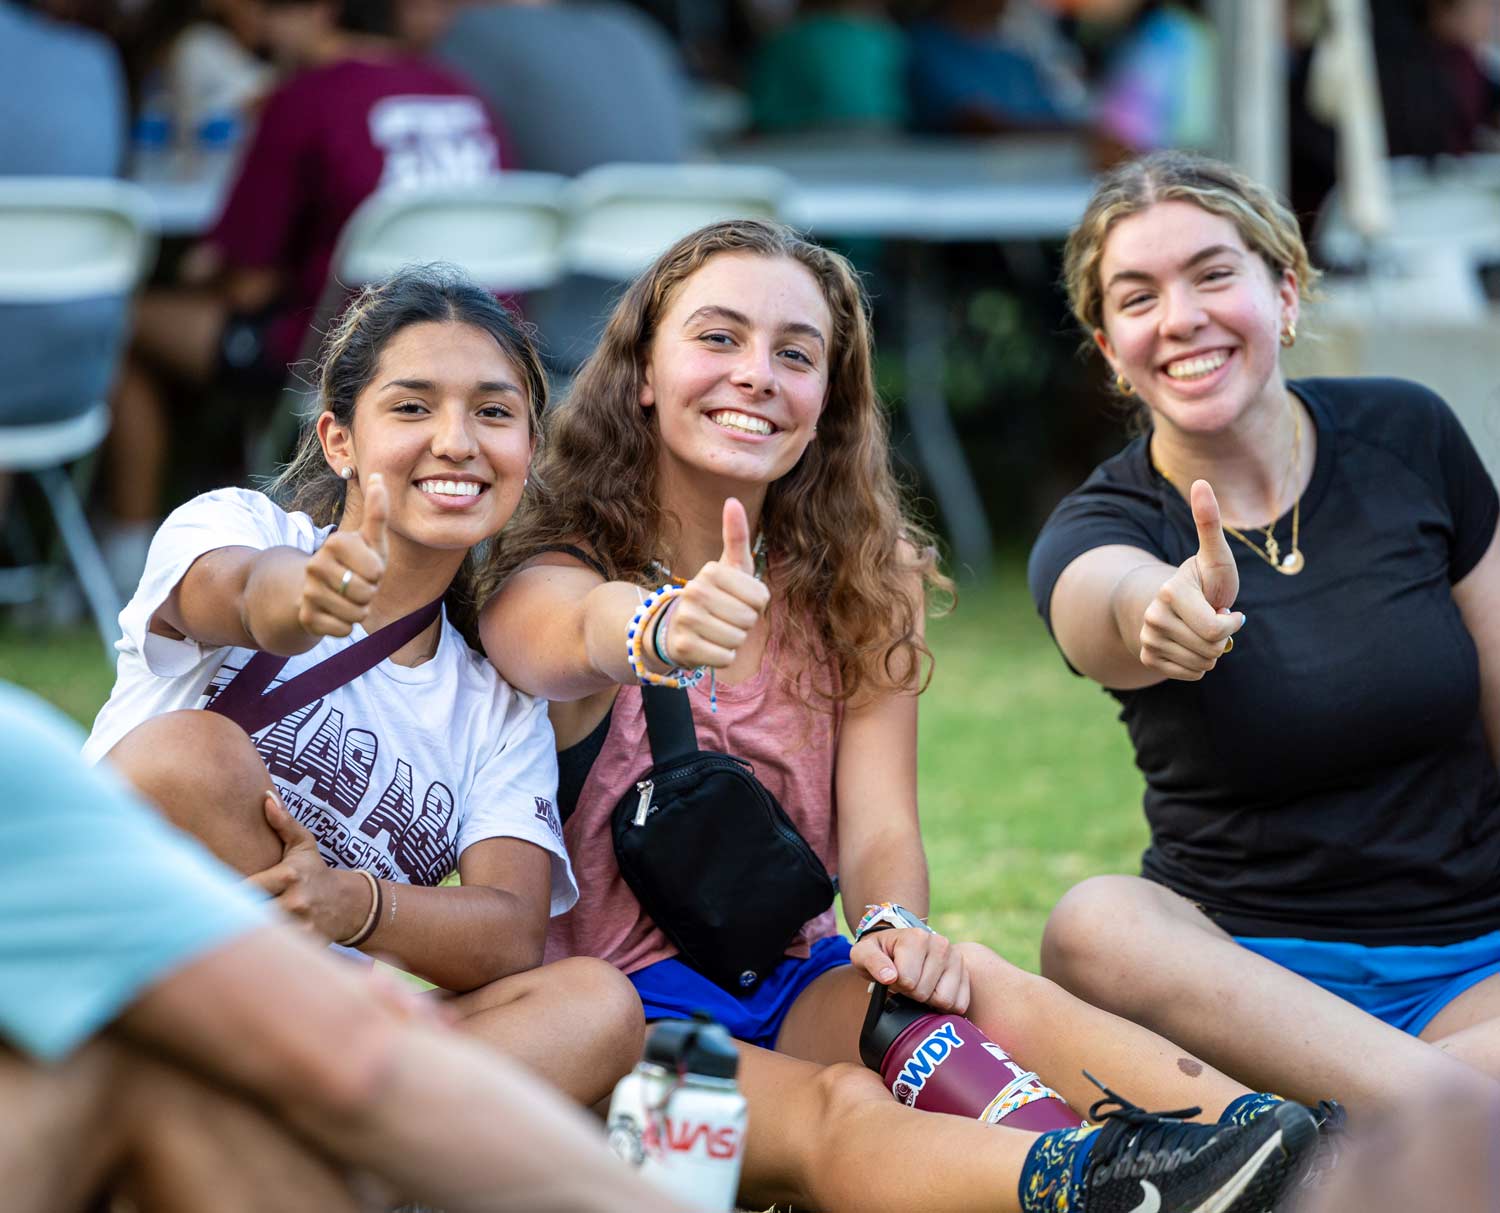 Excited students posing for a photo - gig 'em